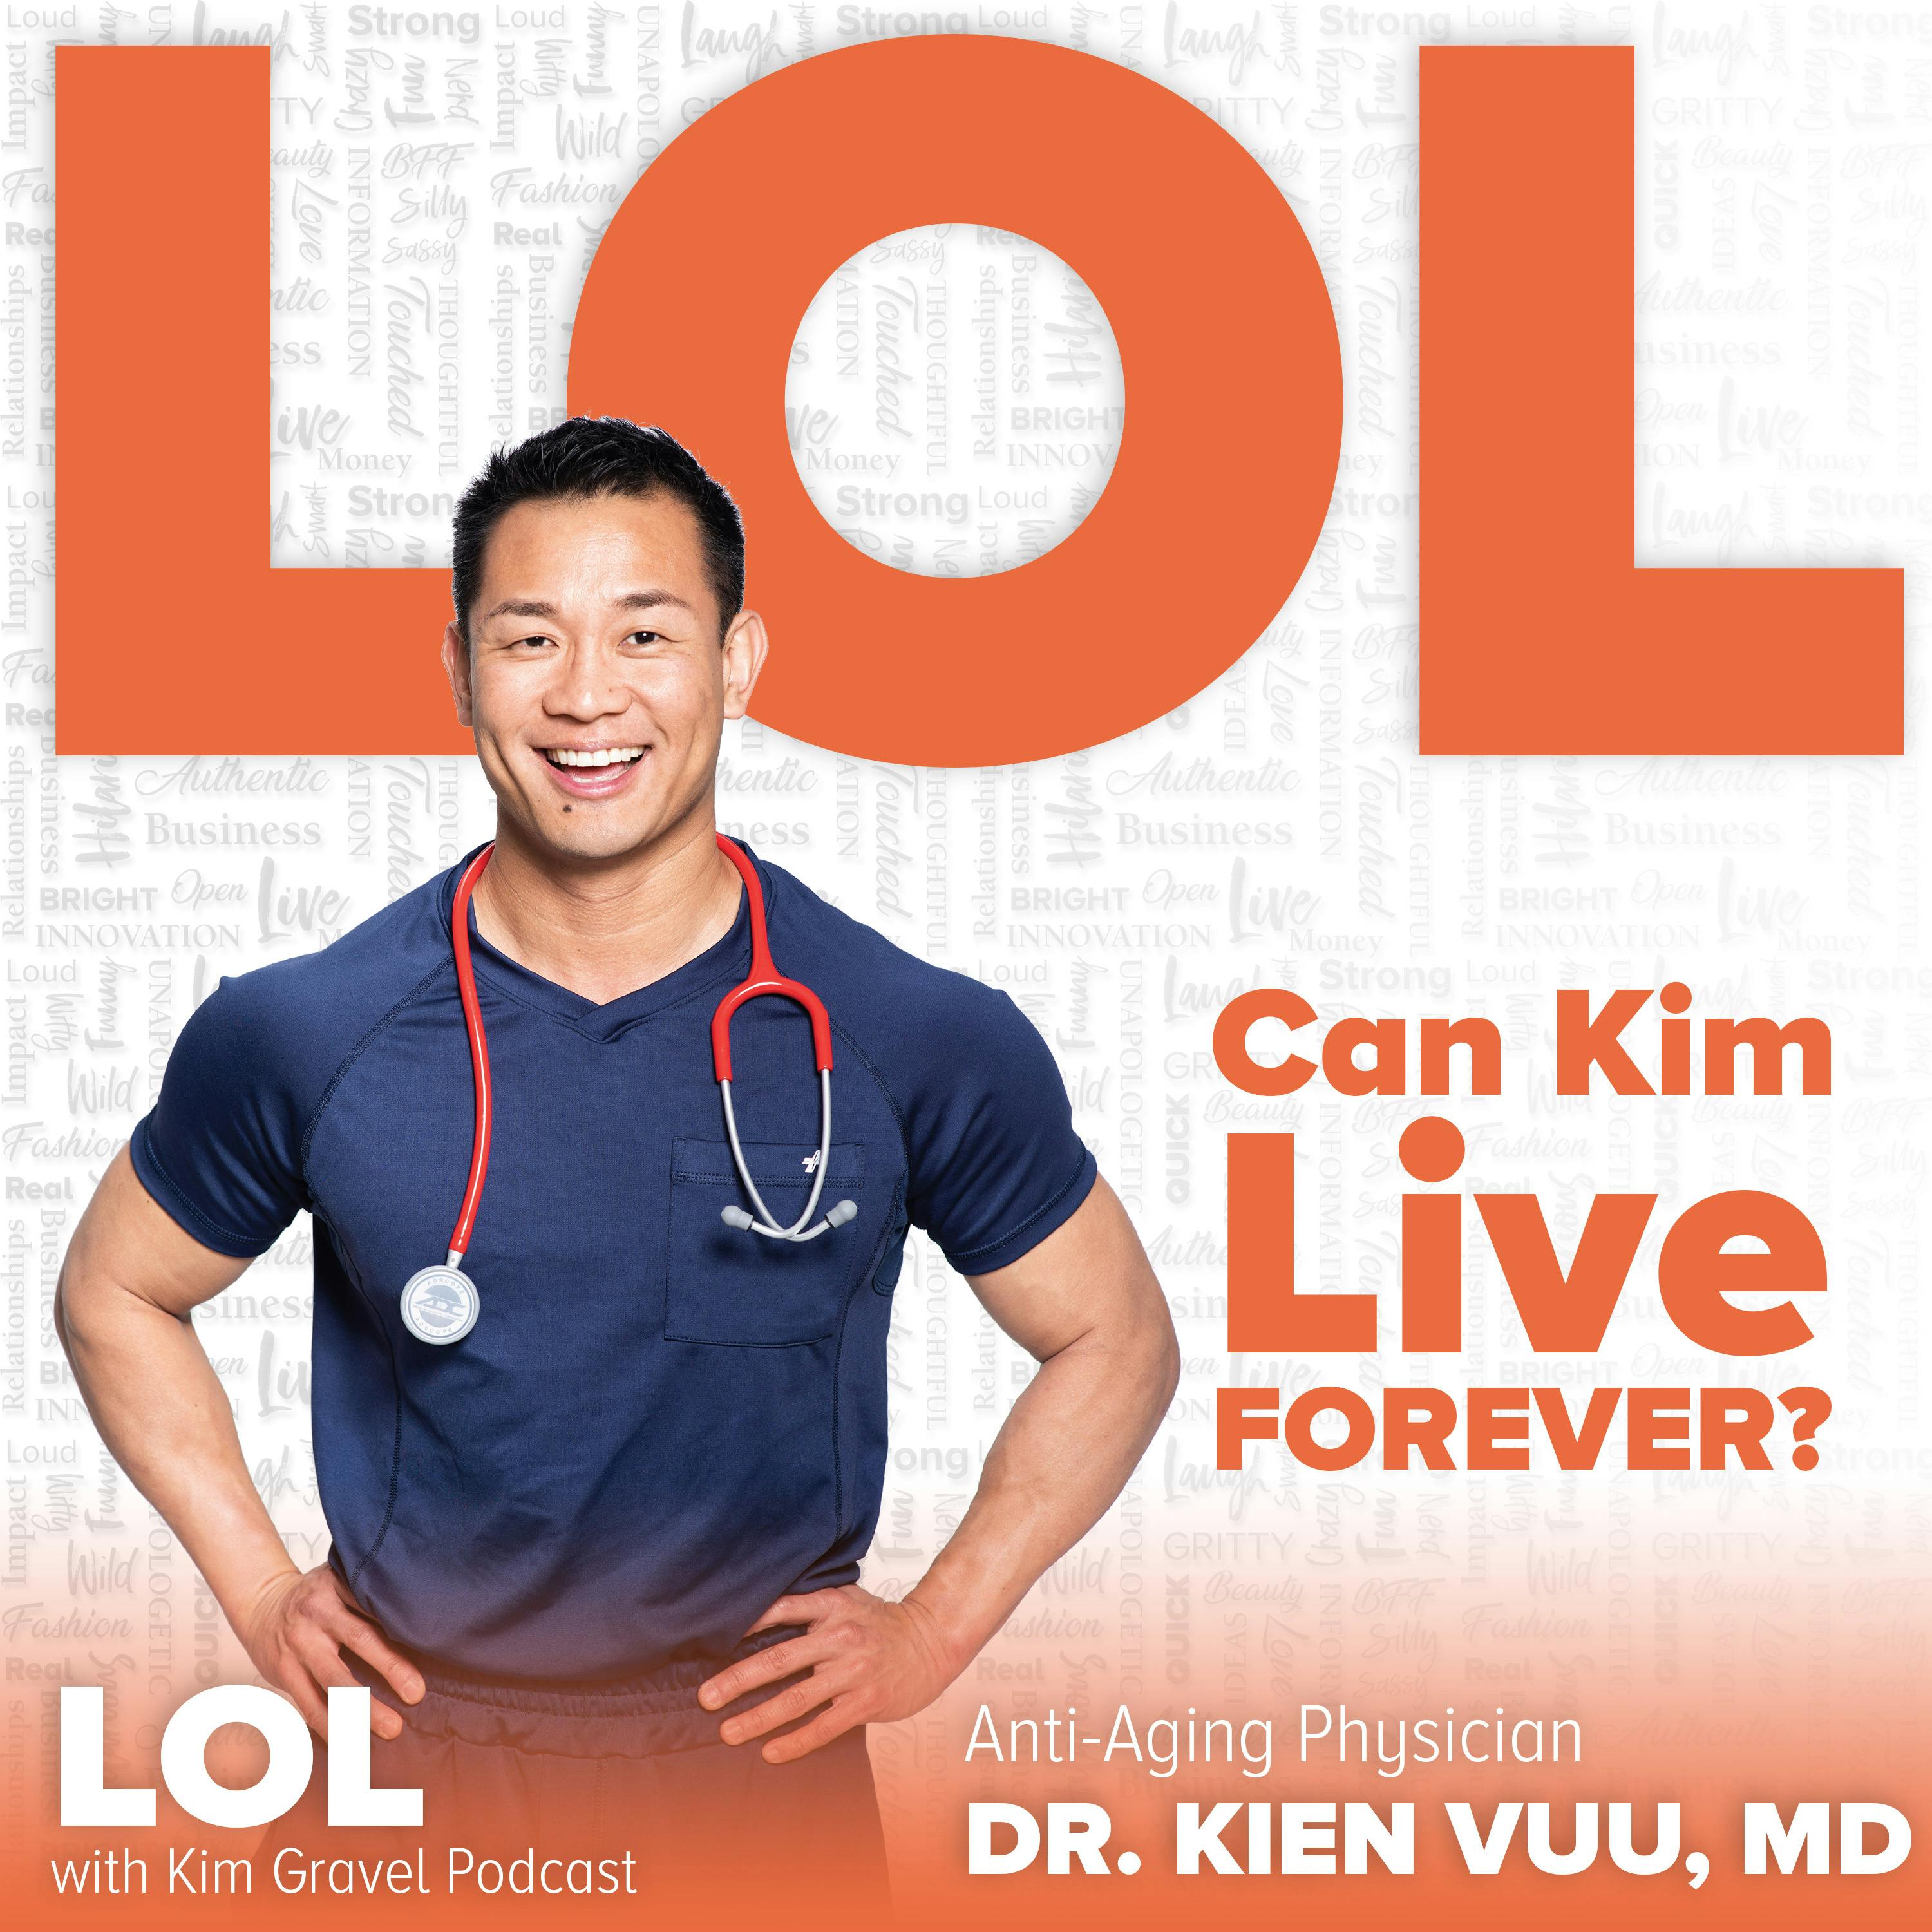 Can Kim Live Forever? With Dr. Kien Vuu, MD Image